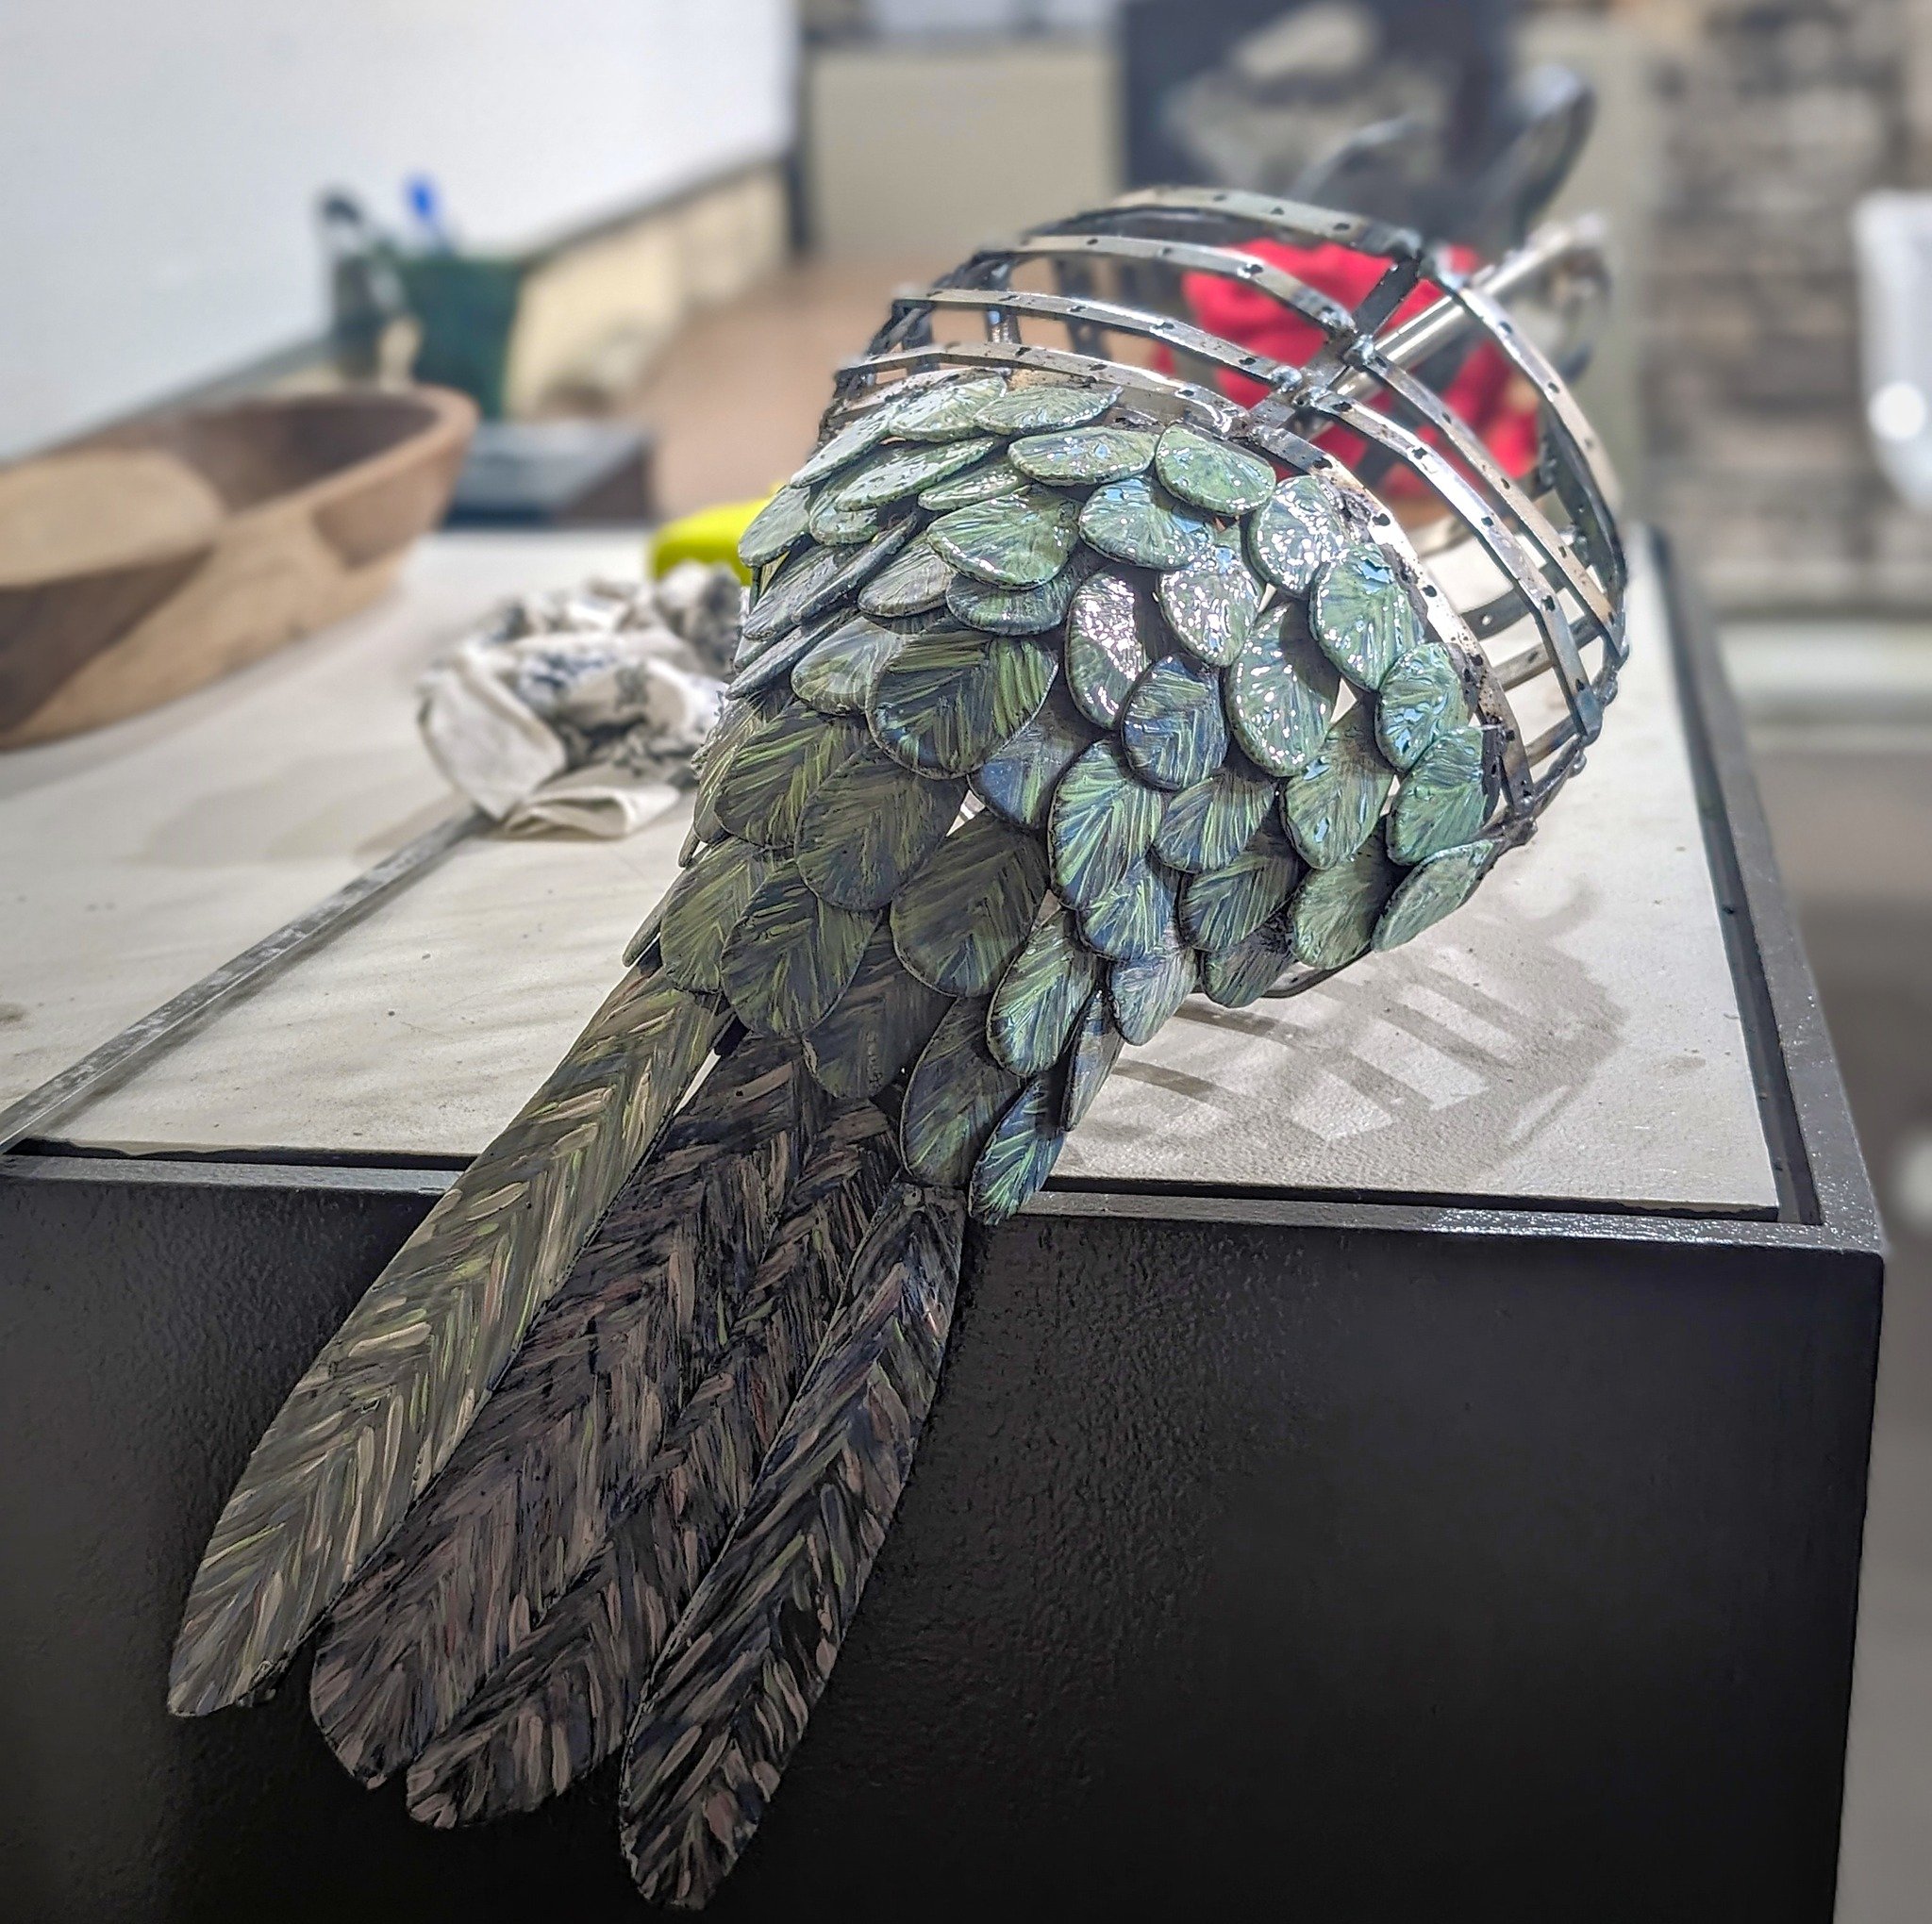 @dani_db_mosaicsarg is hard at work in the CAFAC shop on her next sculpture, an intricate hummingbird made of enameled feathers on a steel frame. Follow her for updates!

[Image descriptions: 1. A view of the hummingbird sculpture as assembled. The t